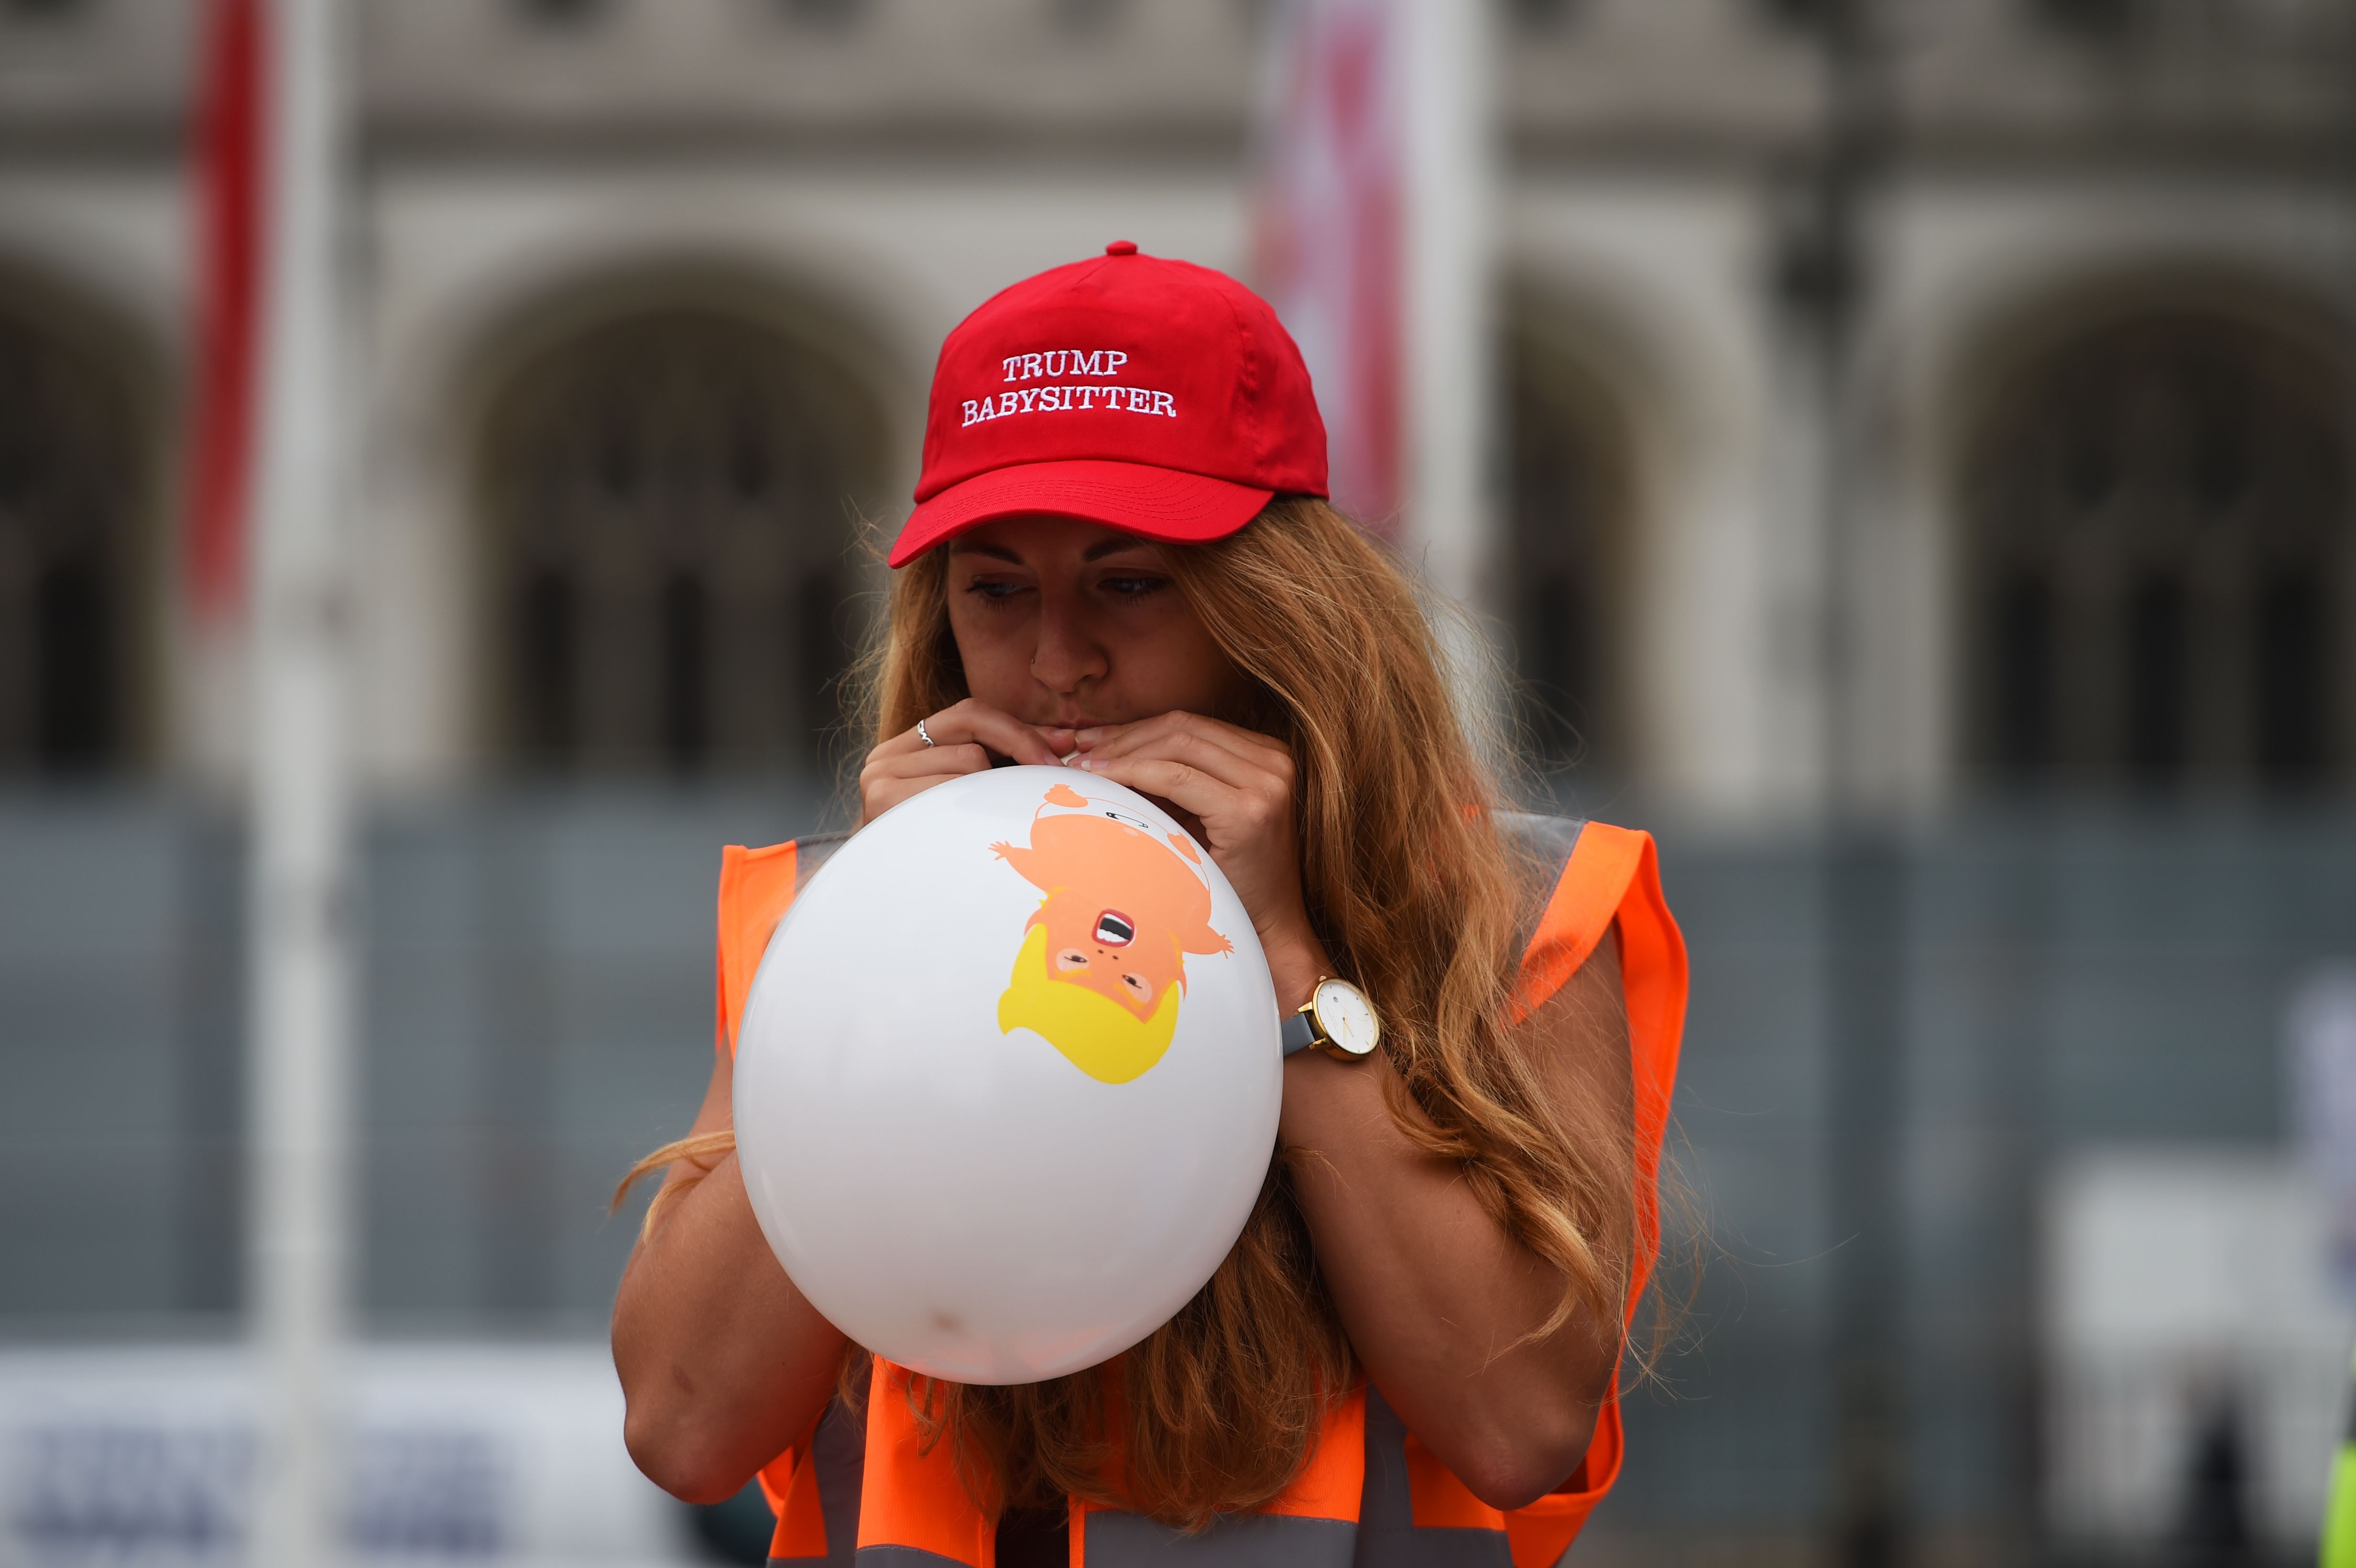 A member of the Baby Trump Balloon team blows up a balloon in Parliament Square, London.